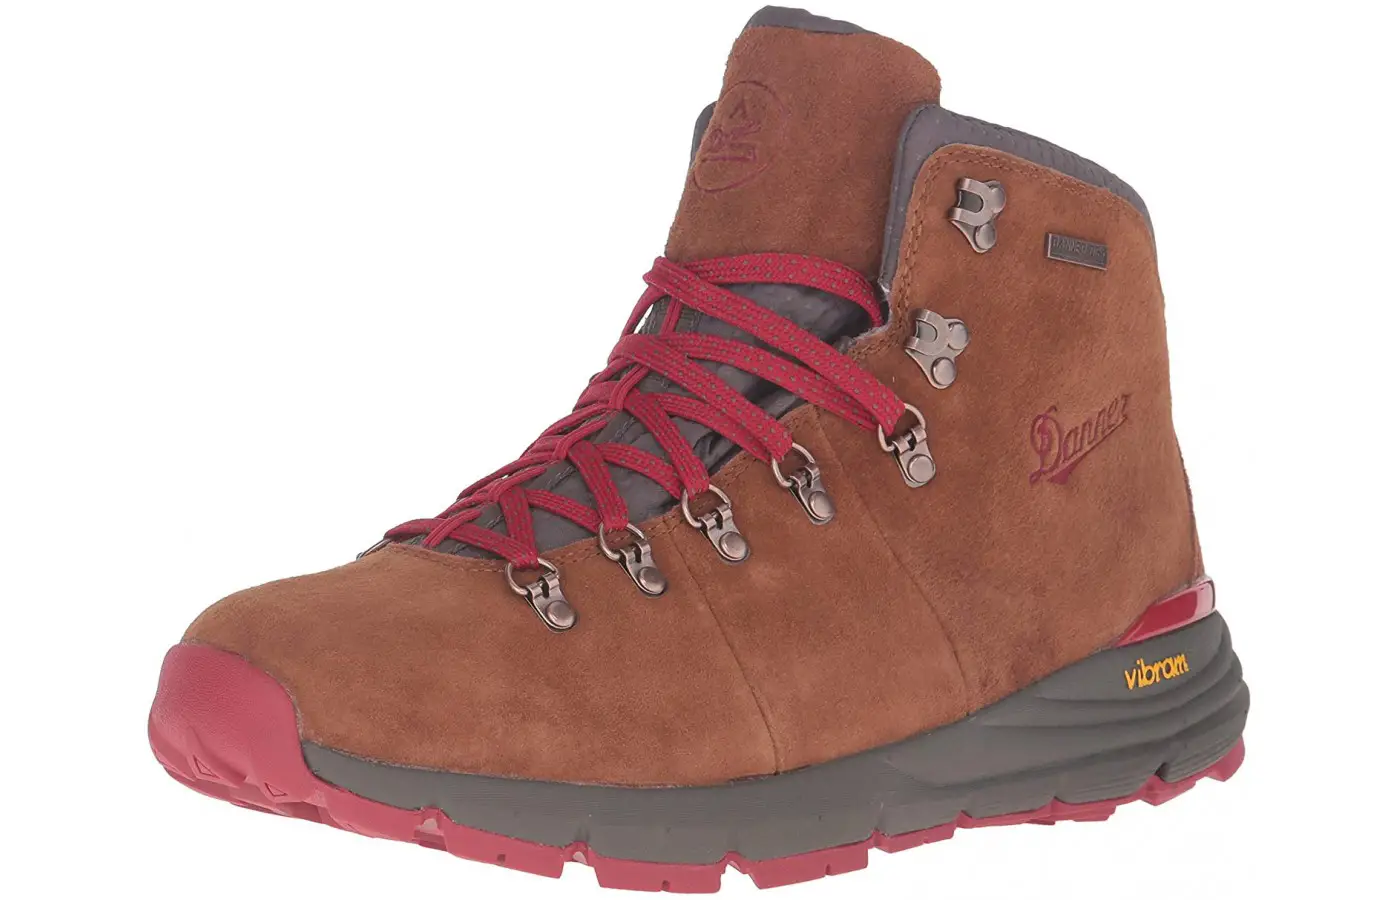 The Danner Mountain 600 rocks an old-school style.